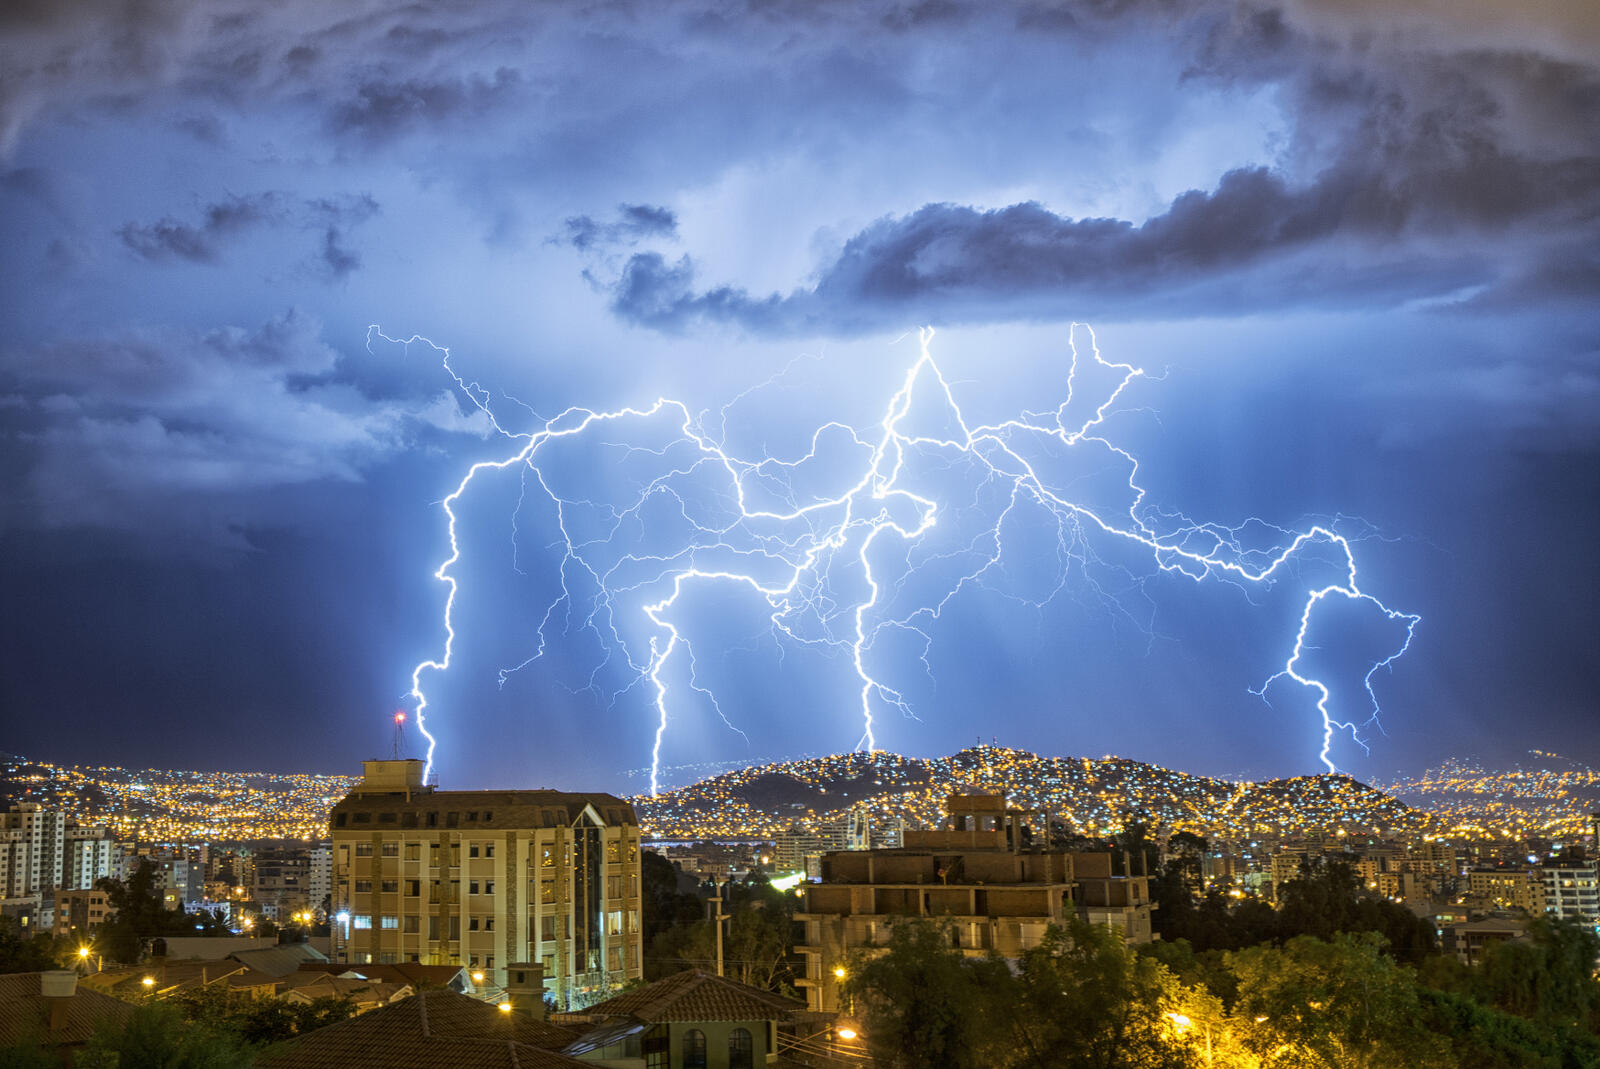 Wallpapers thunder storm city on the desktop